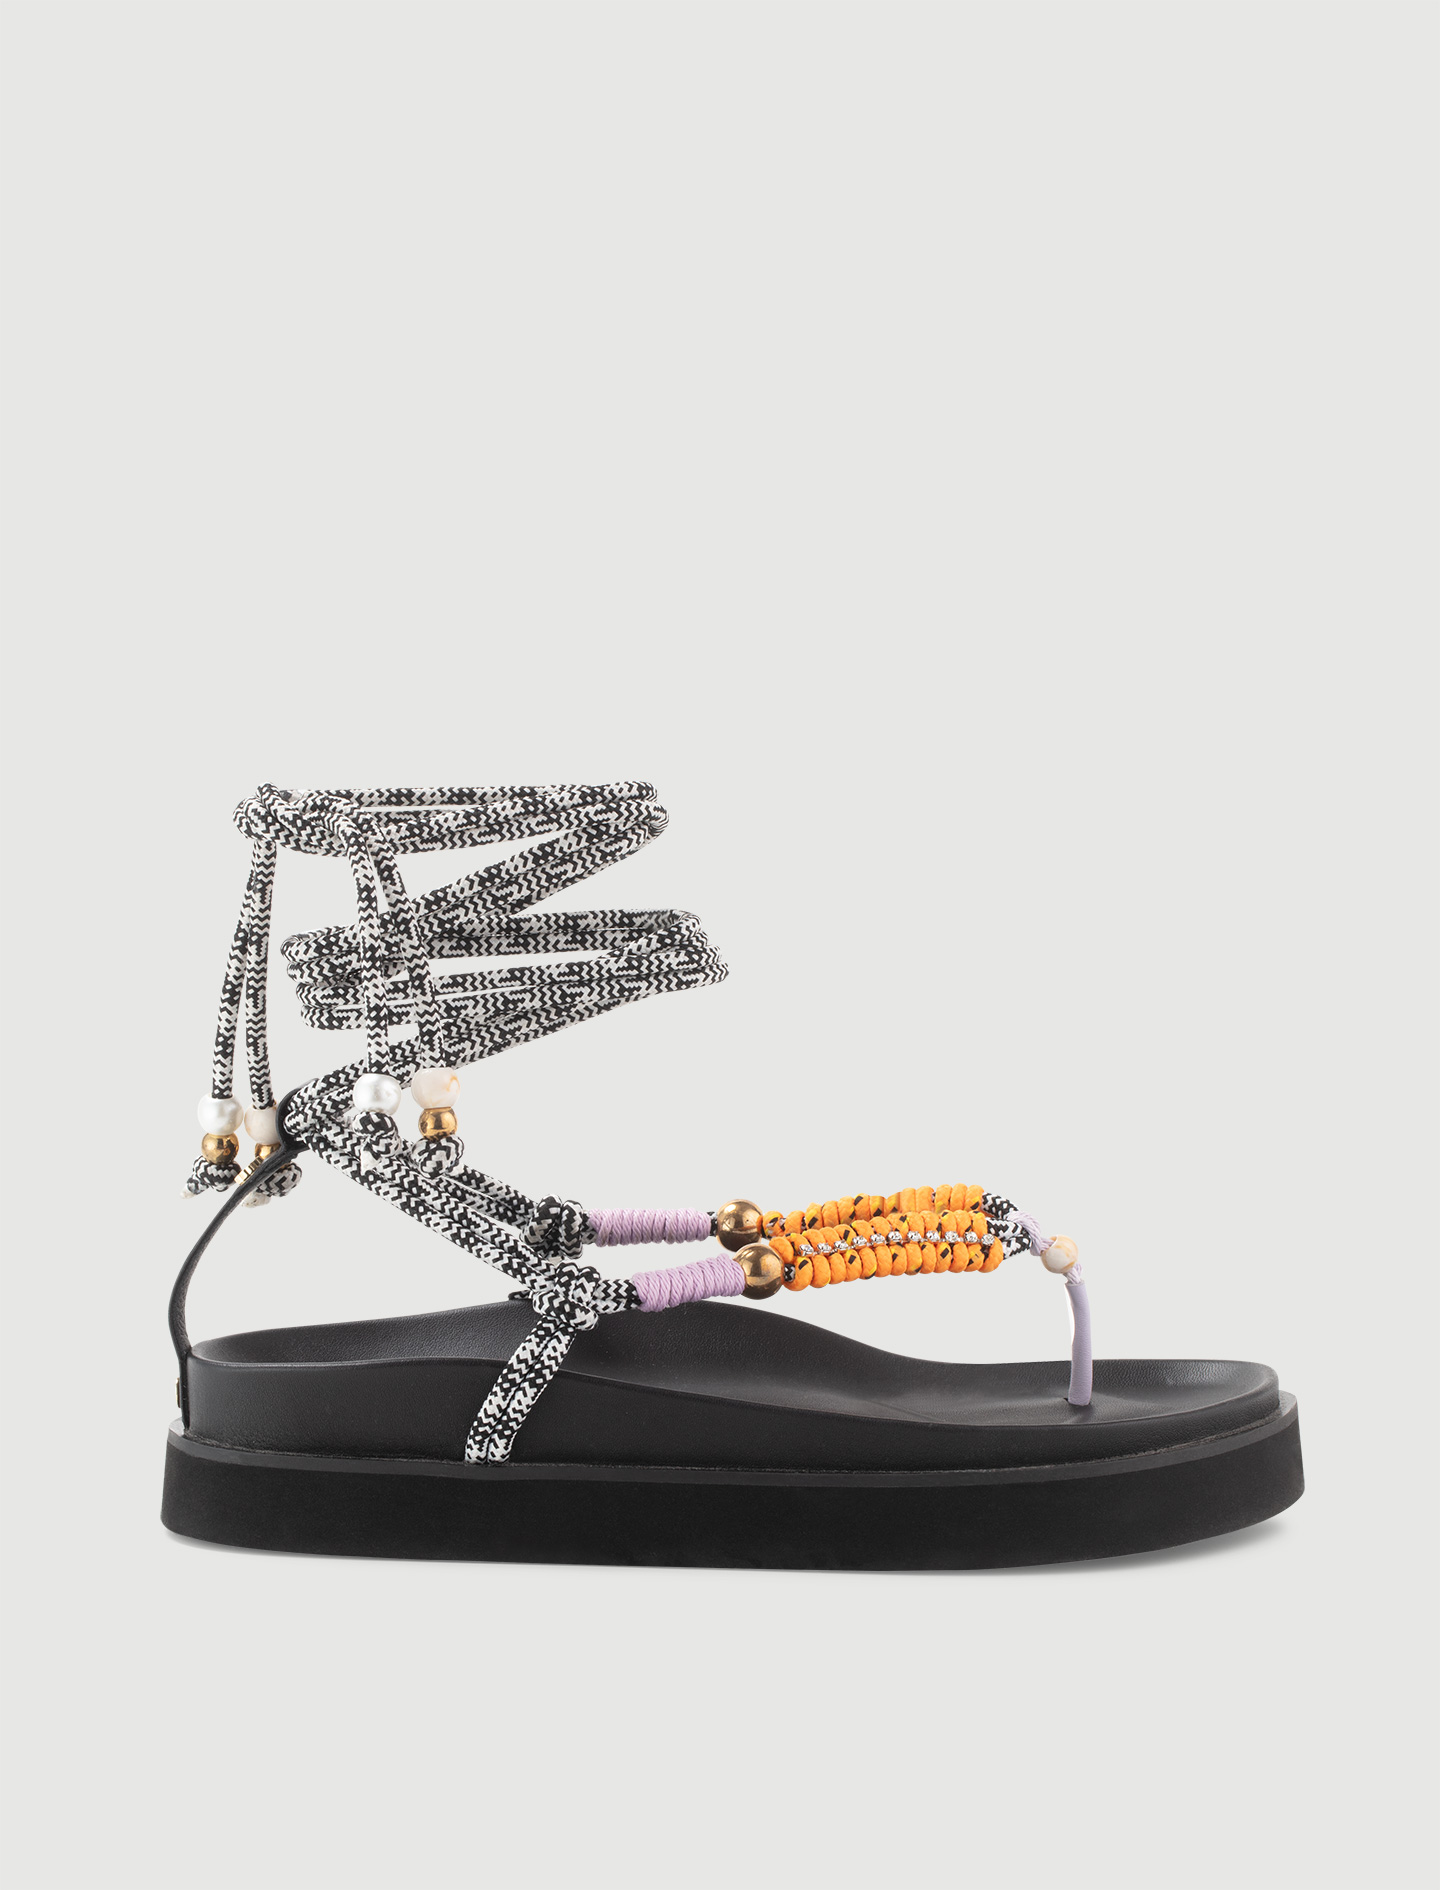 Mixte's polyester Ornaments: Sandals with braided straps, size Mixte-All Shoes-US 10.5 / FR 41, in color Parma Violet / Red